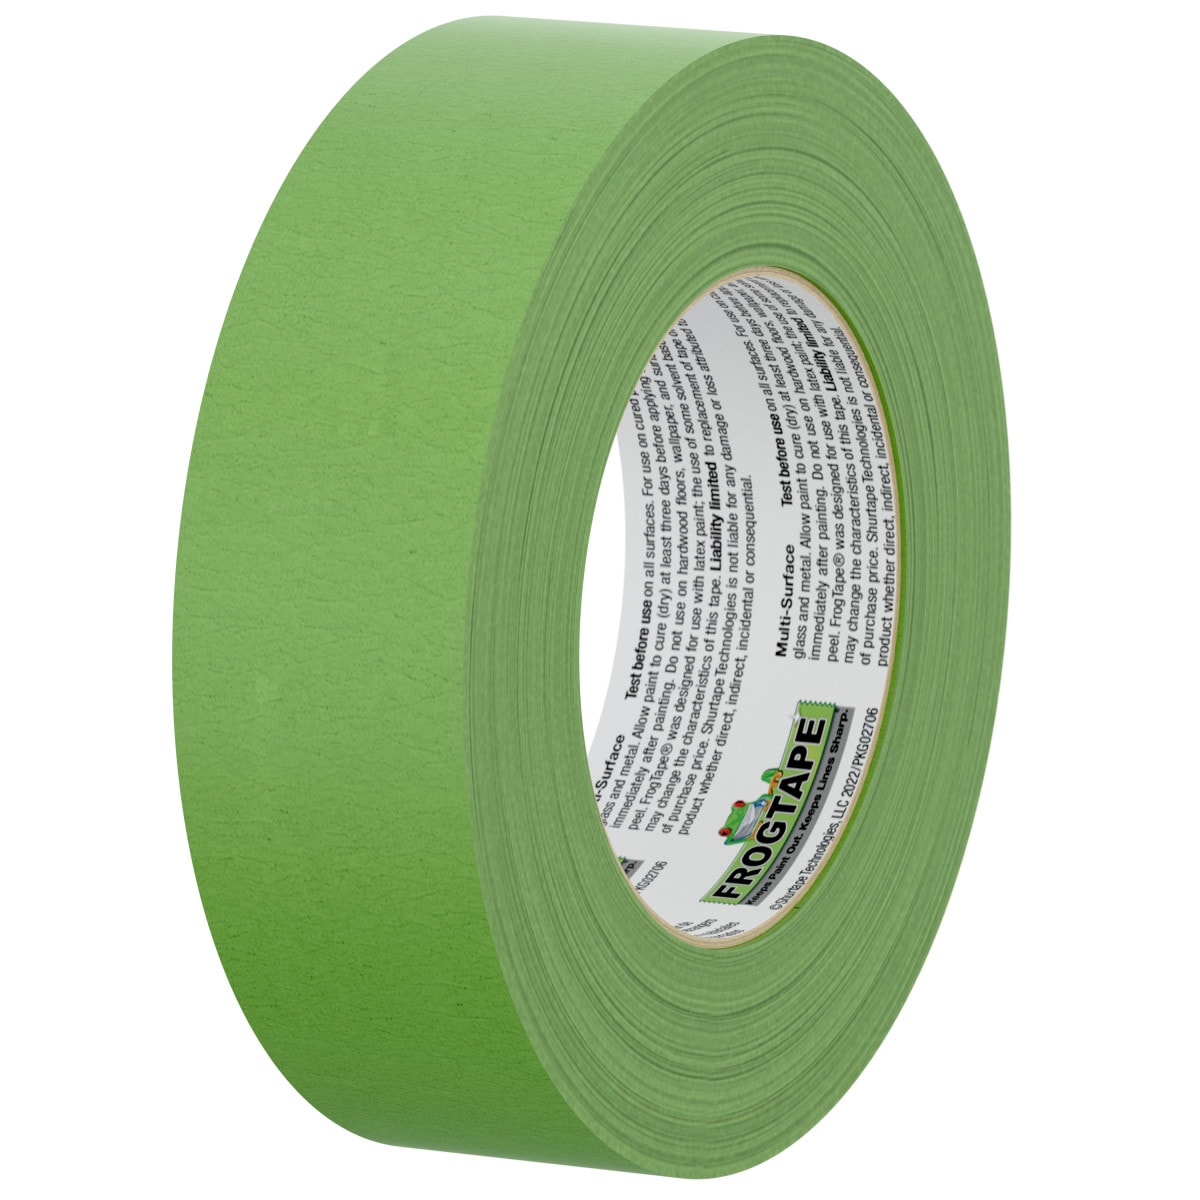 FrogTape 1 7/8 x 60 Yards Green Multi-Surface Painter's Tape